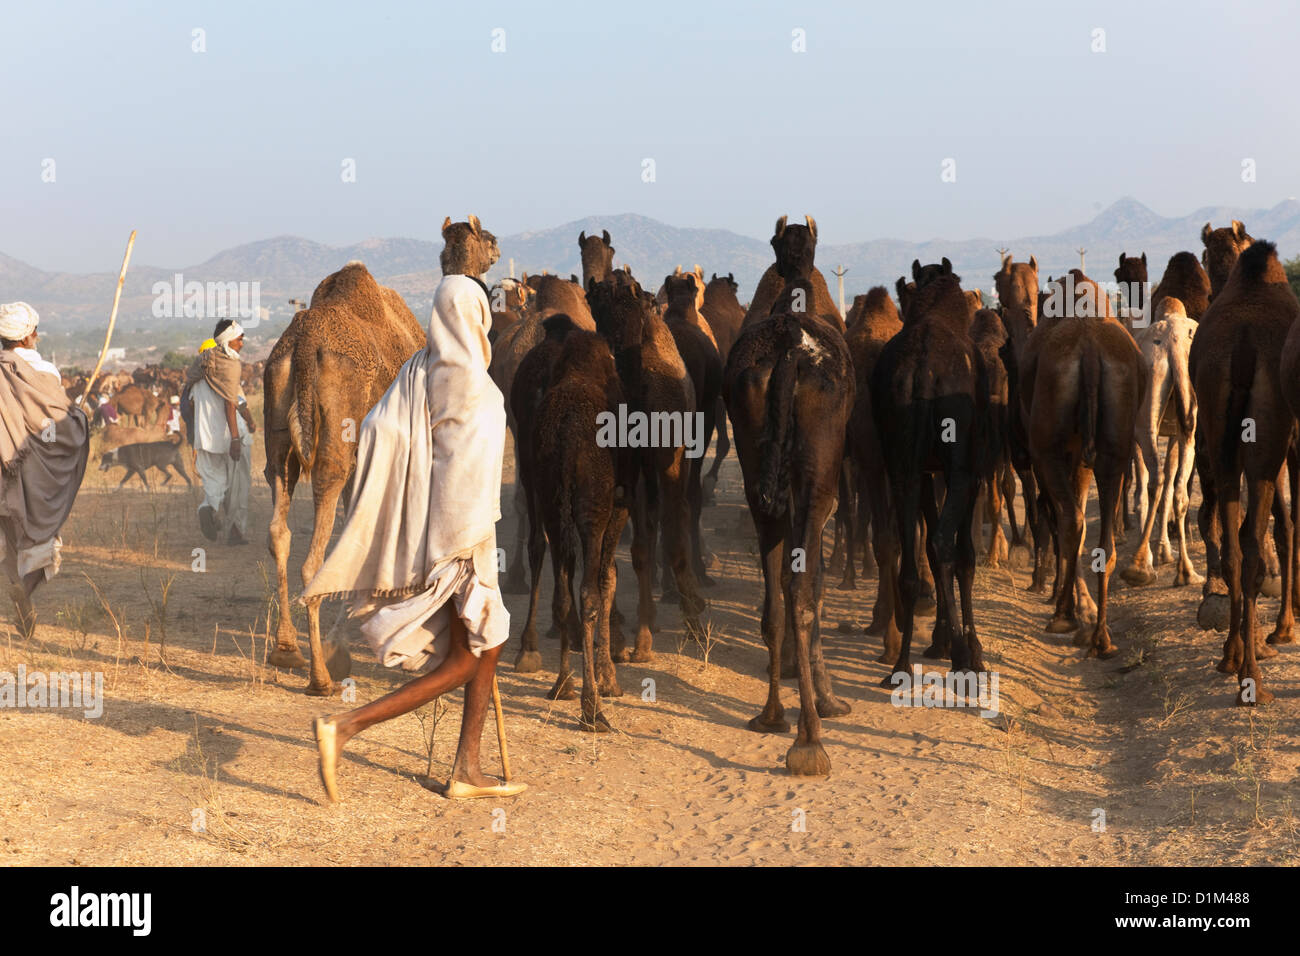 Camel traders carrying sticks  herd camels through the Thar desert at the annual camel fair in Pushkar India Asia Stock Photo